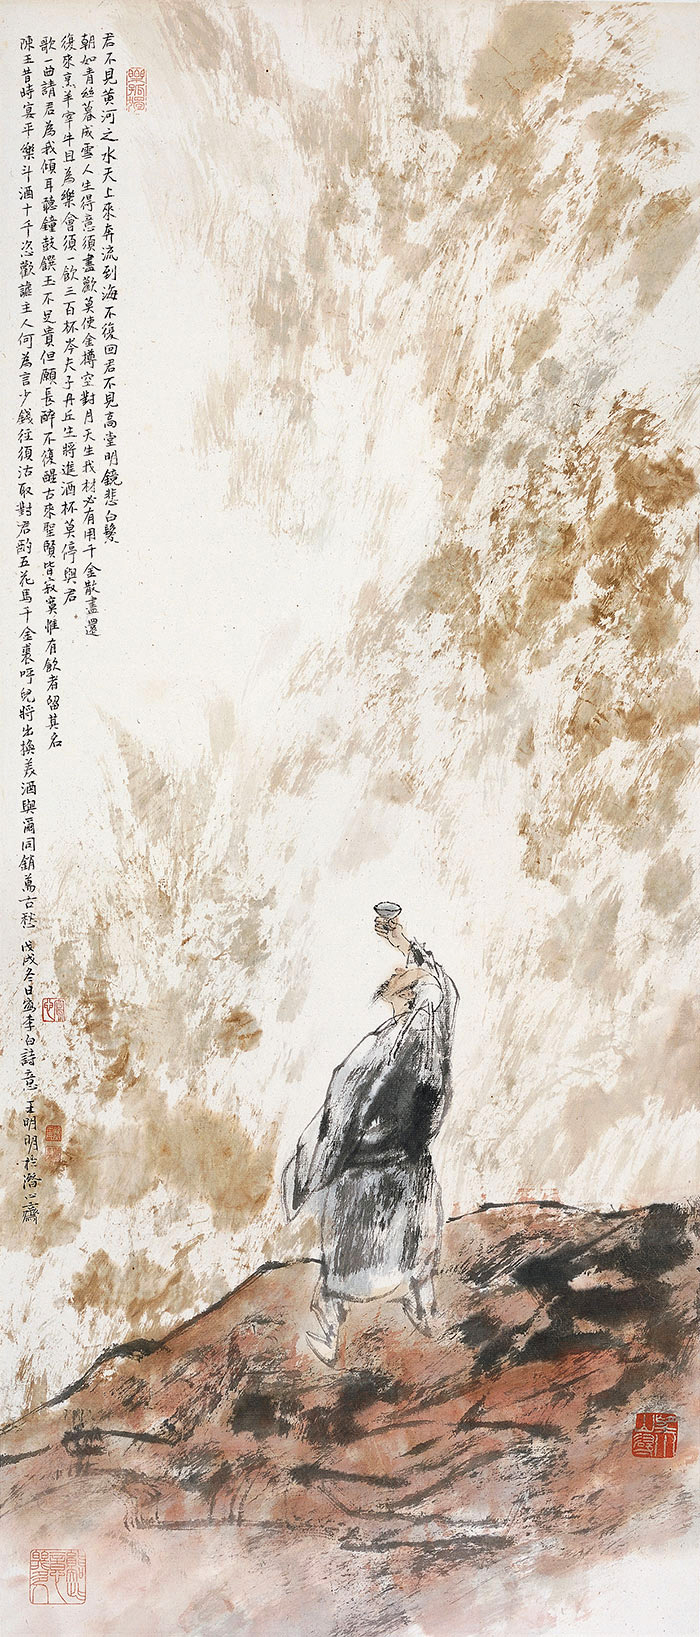 ChipGAN Style Transfer Masters Chinese Ink Wash Painting